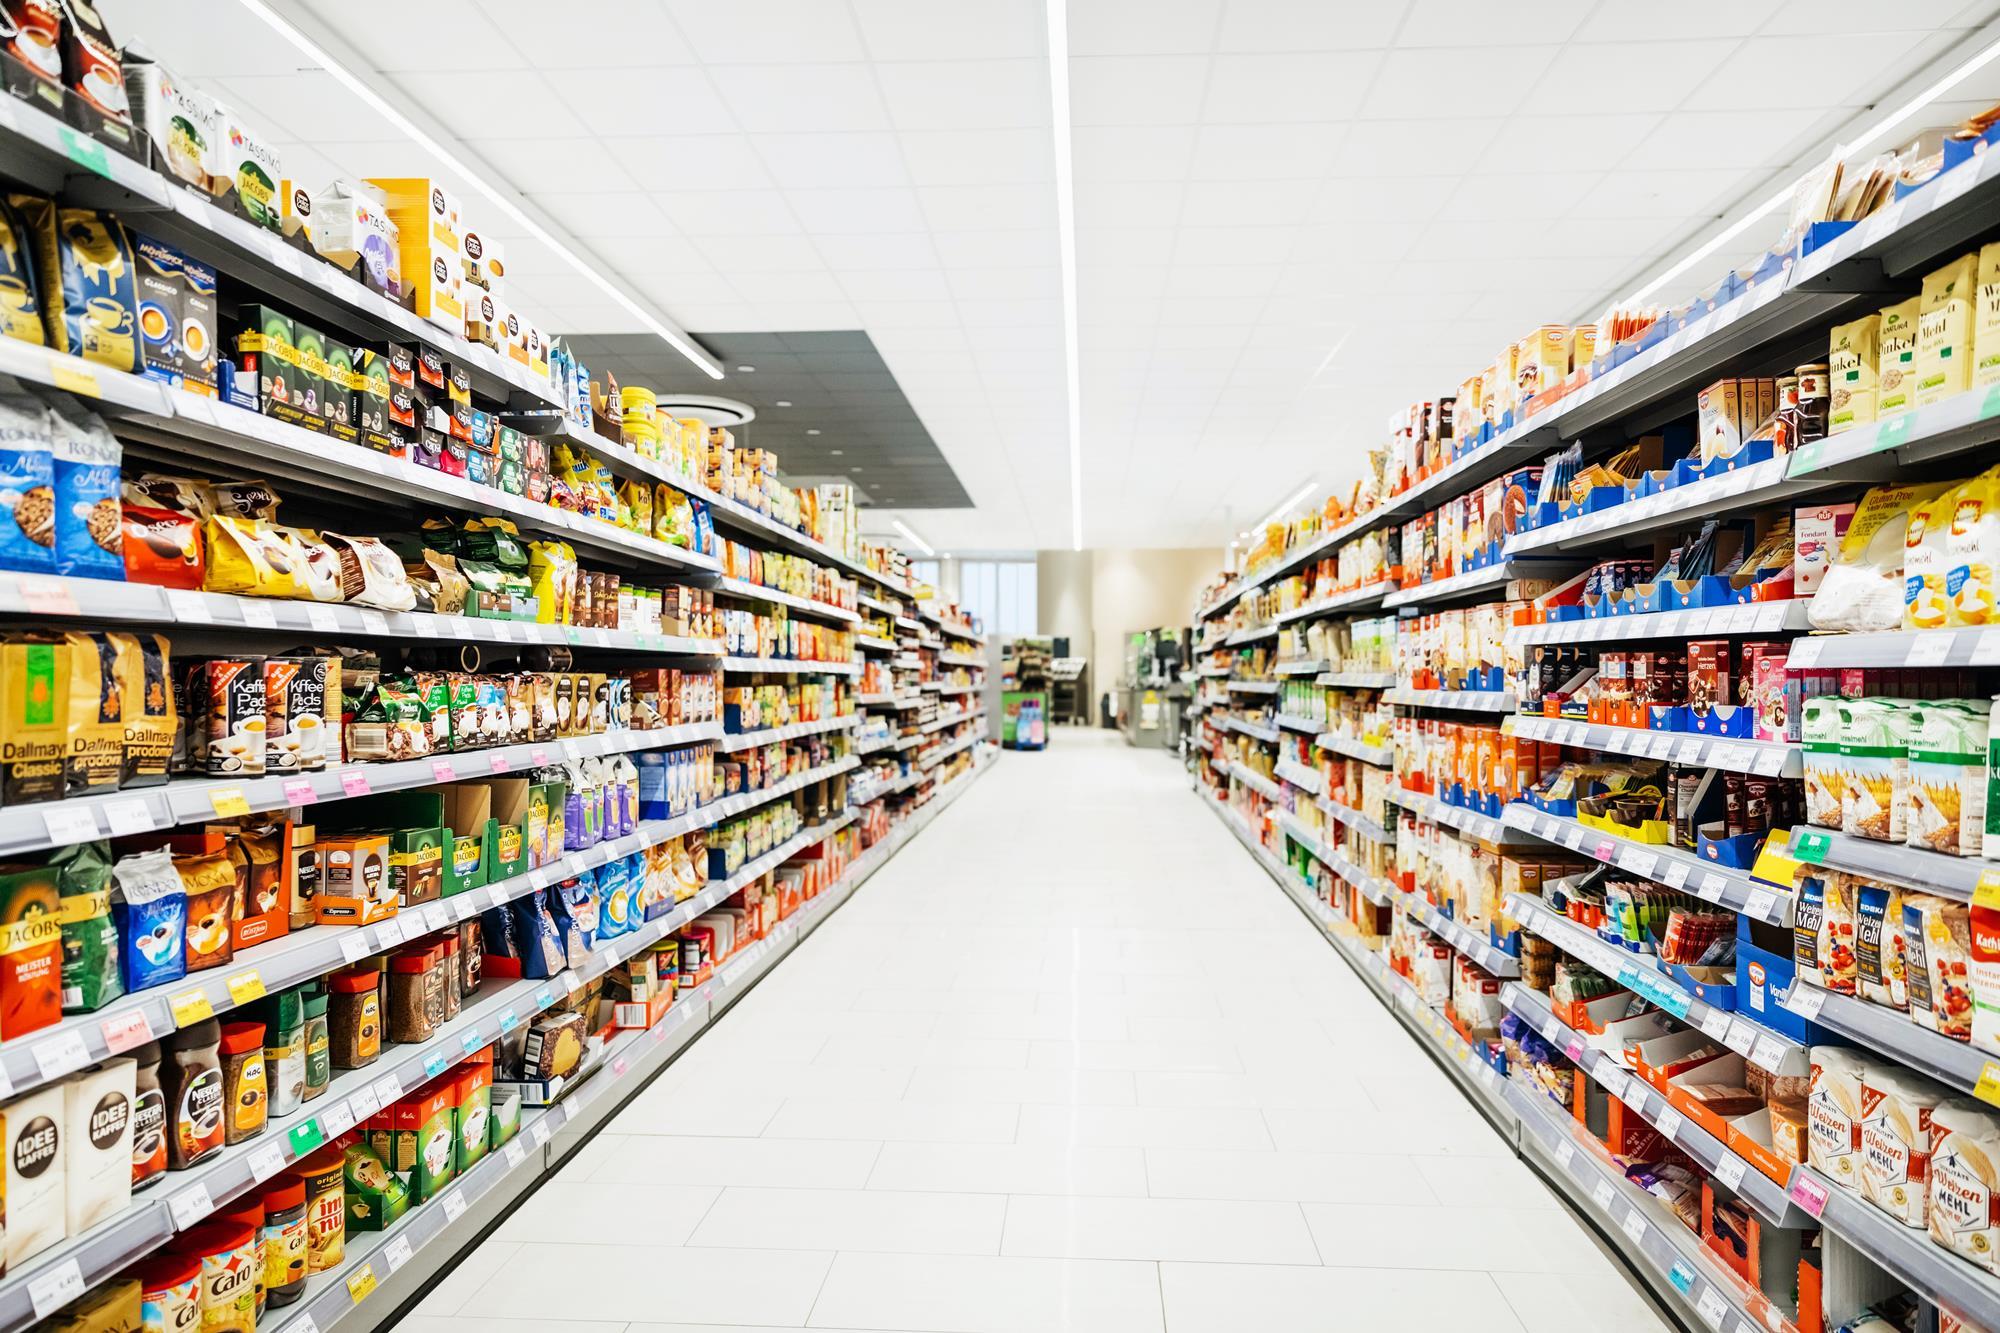 What Are The Key Issues Of FMCG